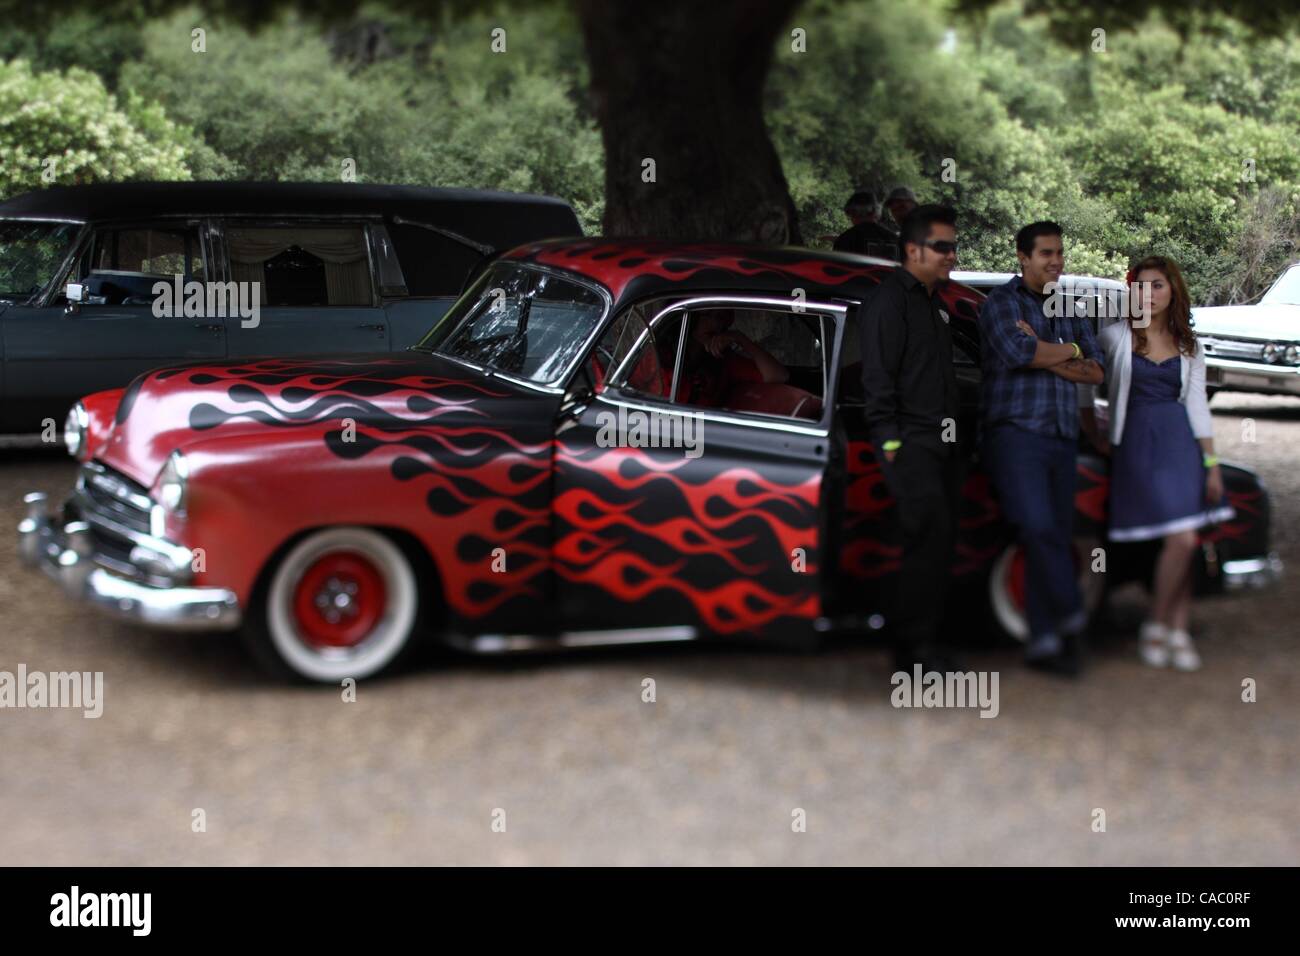 Jul 03, 2010 - Irvine, California, USA - The 16th annual Hootenanny music and cultural festival at Oak Canyon Ranch. People arrive at the rockabilly music festival in a 1951 Chevy painted black with red flames. (Credit Image: Â© Chris Lee/ZUMApress.com) Stock Photo